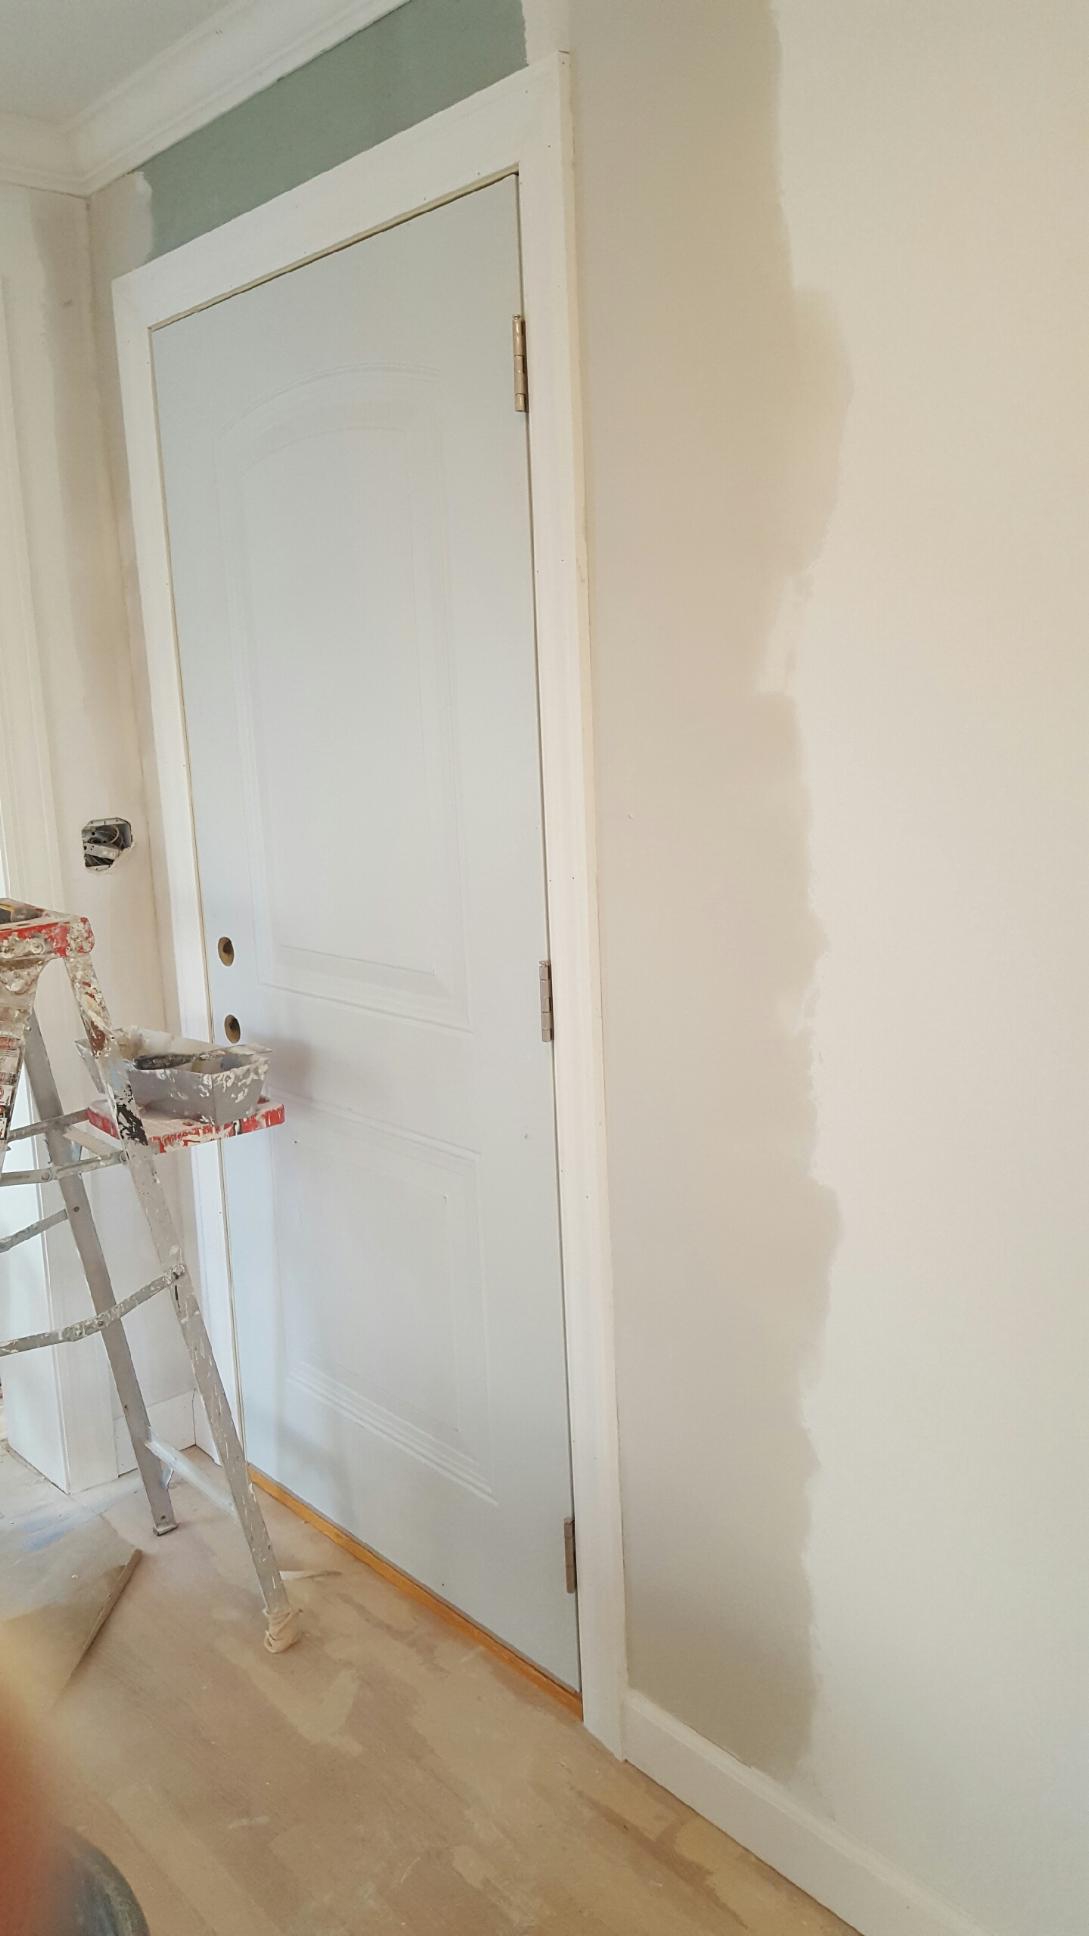 Door being painted along with the wall around it